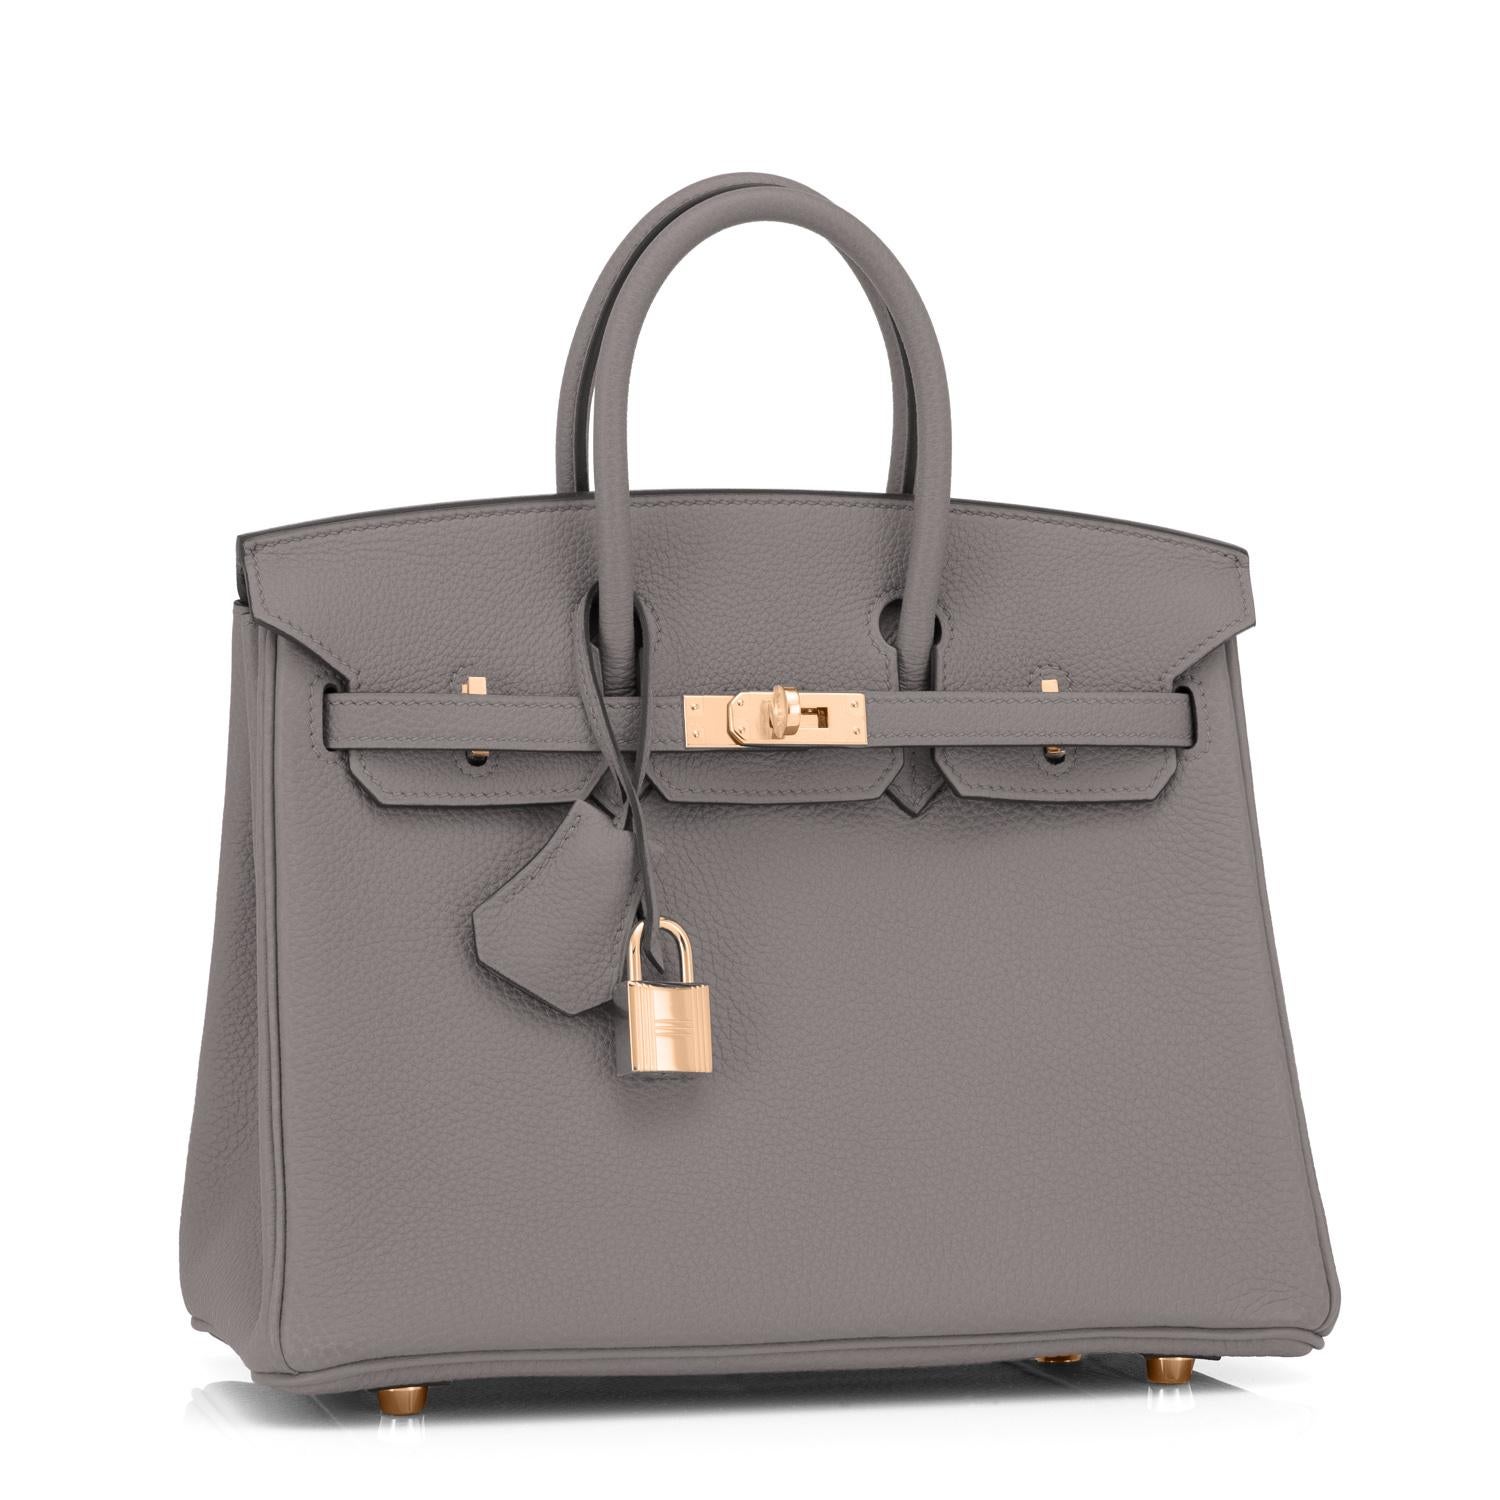 Hermes Birkin 25cm Etain Tin Grey Rose Gold Hardware Bag Y Stamp, 2020
Just purchased from Hermes store; bag bears new interior 2020 Stamp.
Brand New in Box. Store fresh. Pristine Condition (with plastic on hardware)
Perfect gift!  Comes with keys,